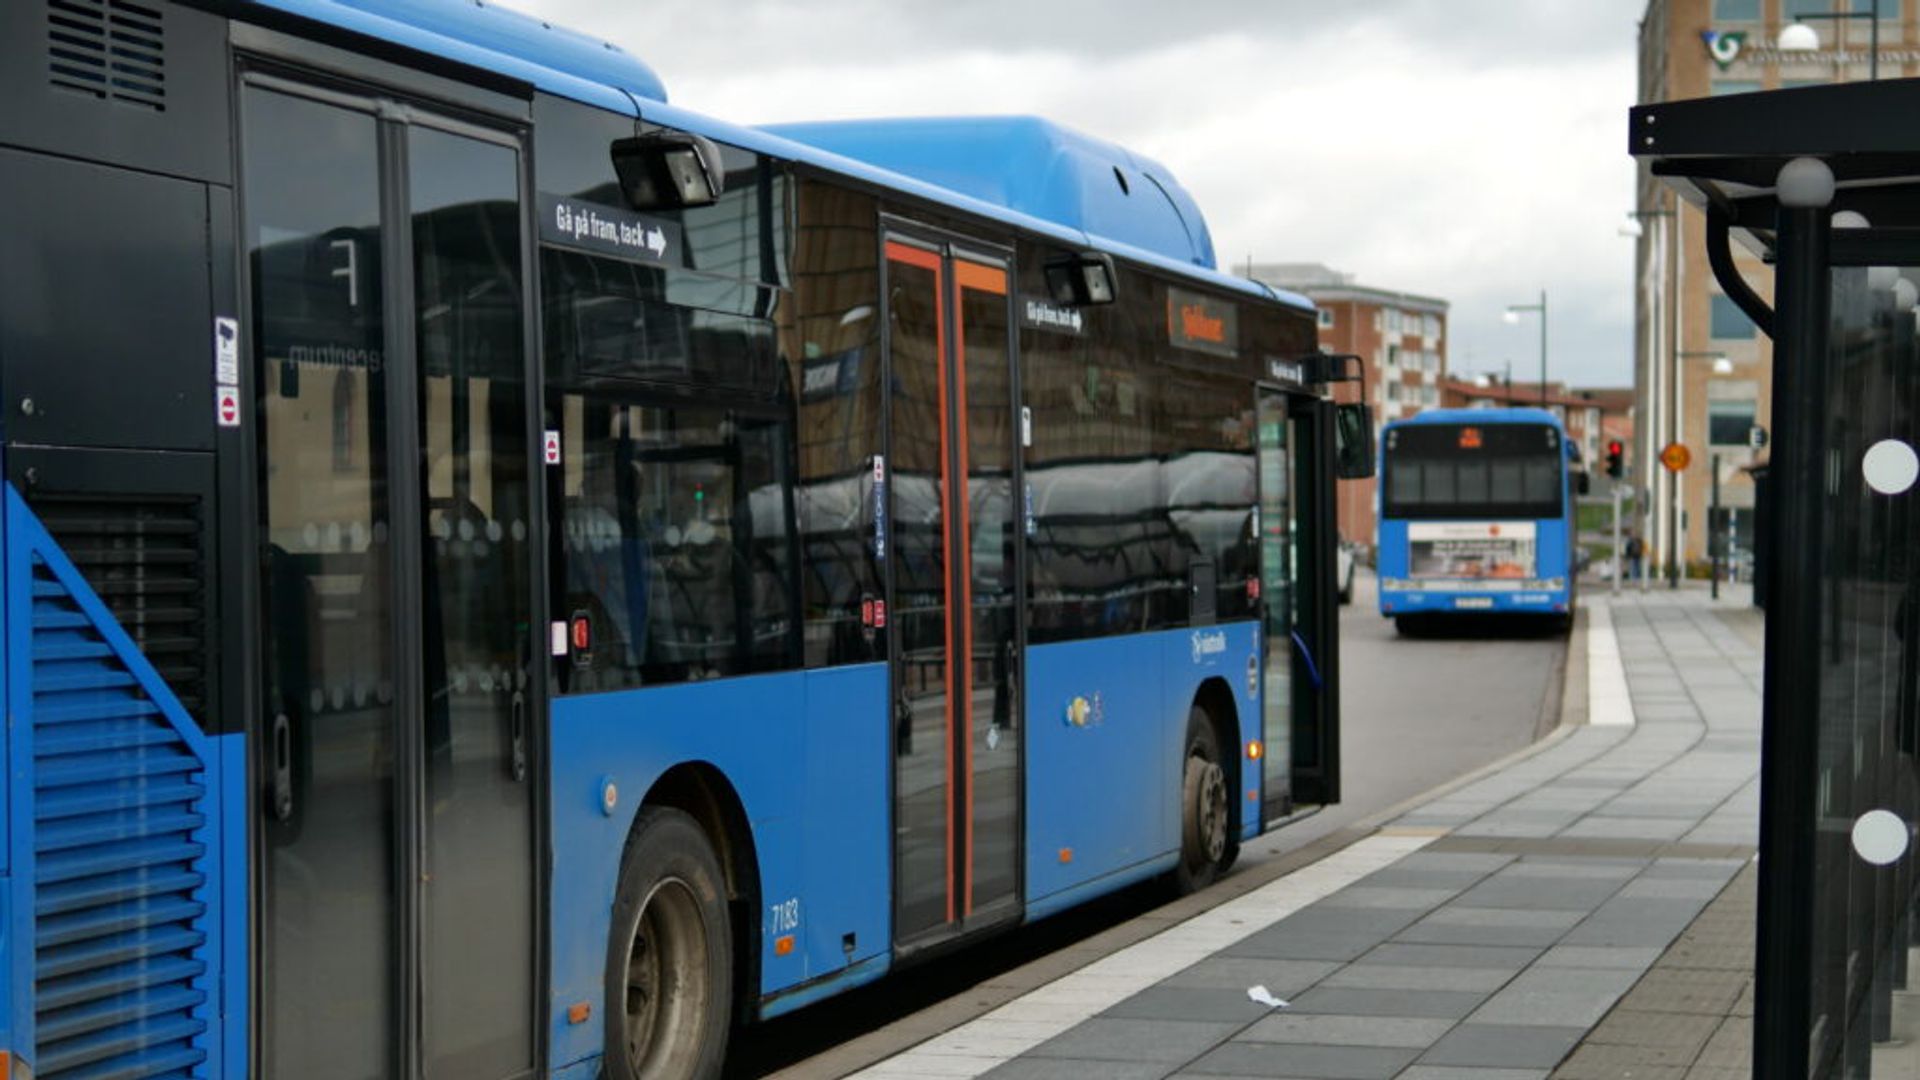 A photo taken of a blue bus waiting by a bus stop in Sweden.